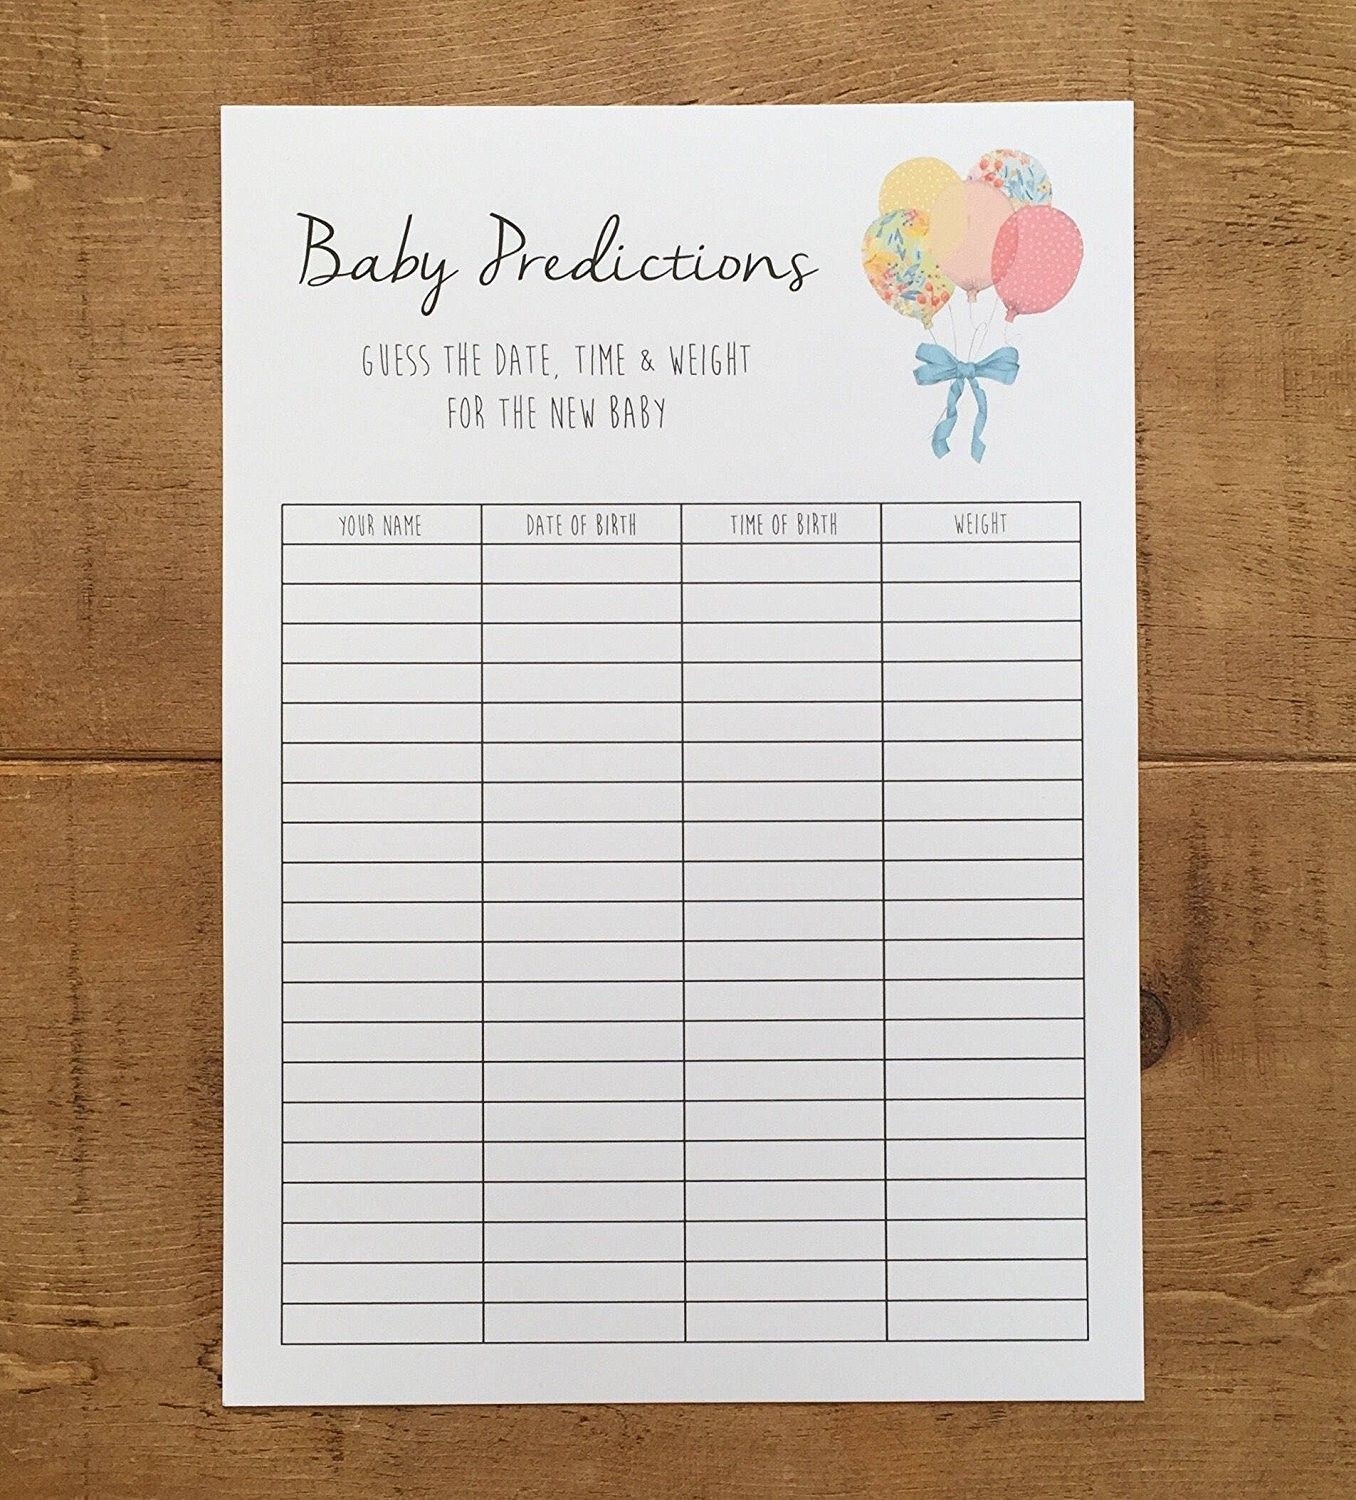 babies due date guess large print out 15